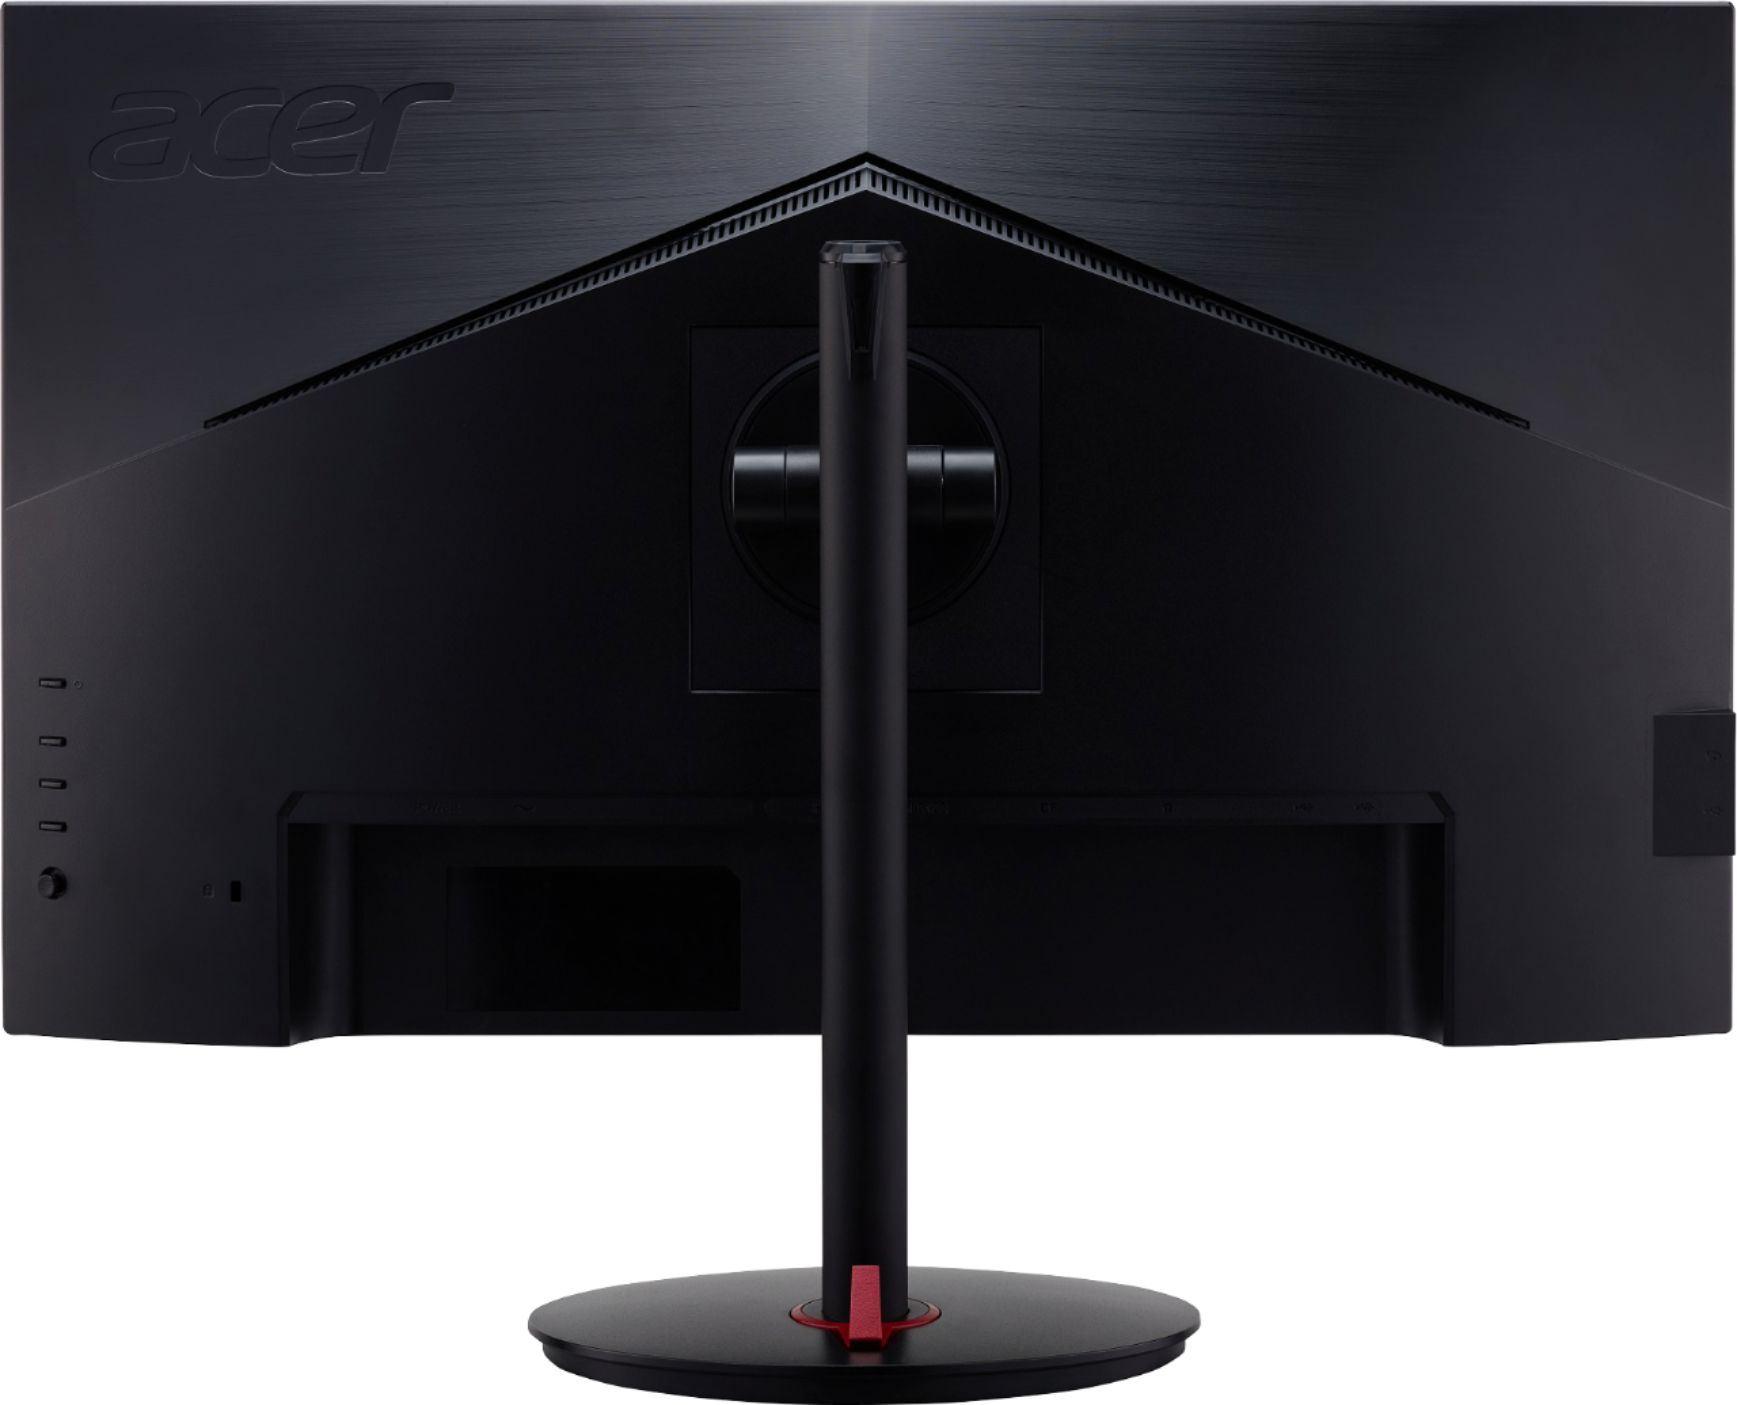 Acer Reveals Its First HDMI 2.1 Monitor, Capable Of 4K And 144Hz - GameSpot